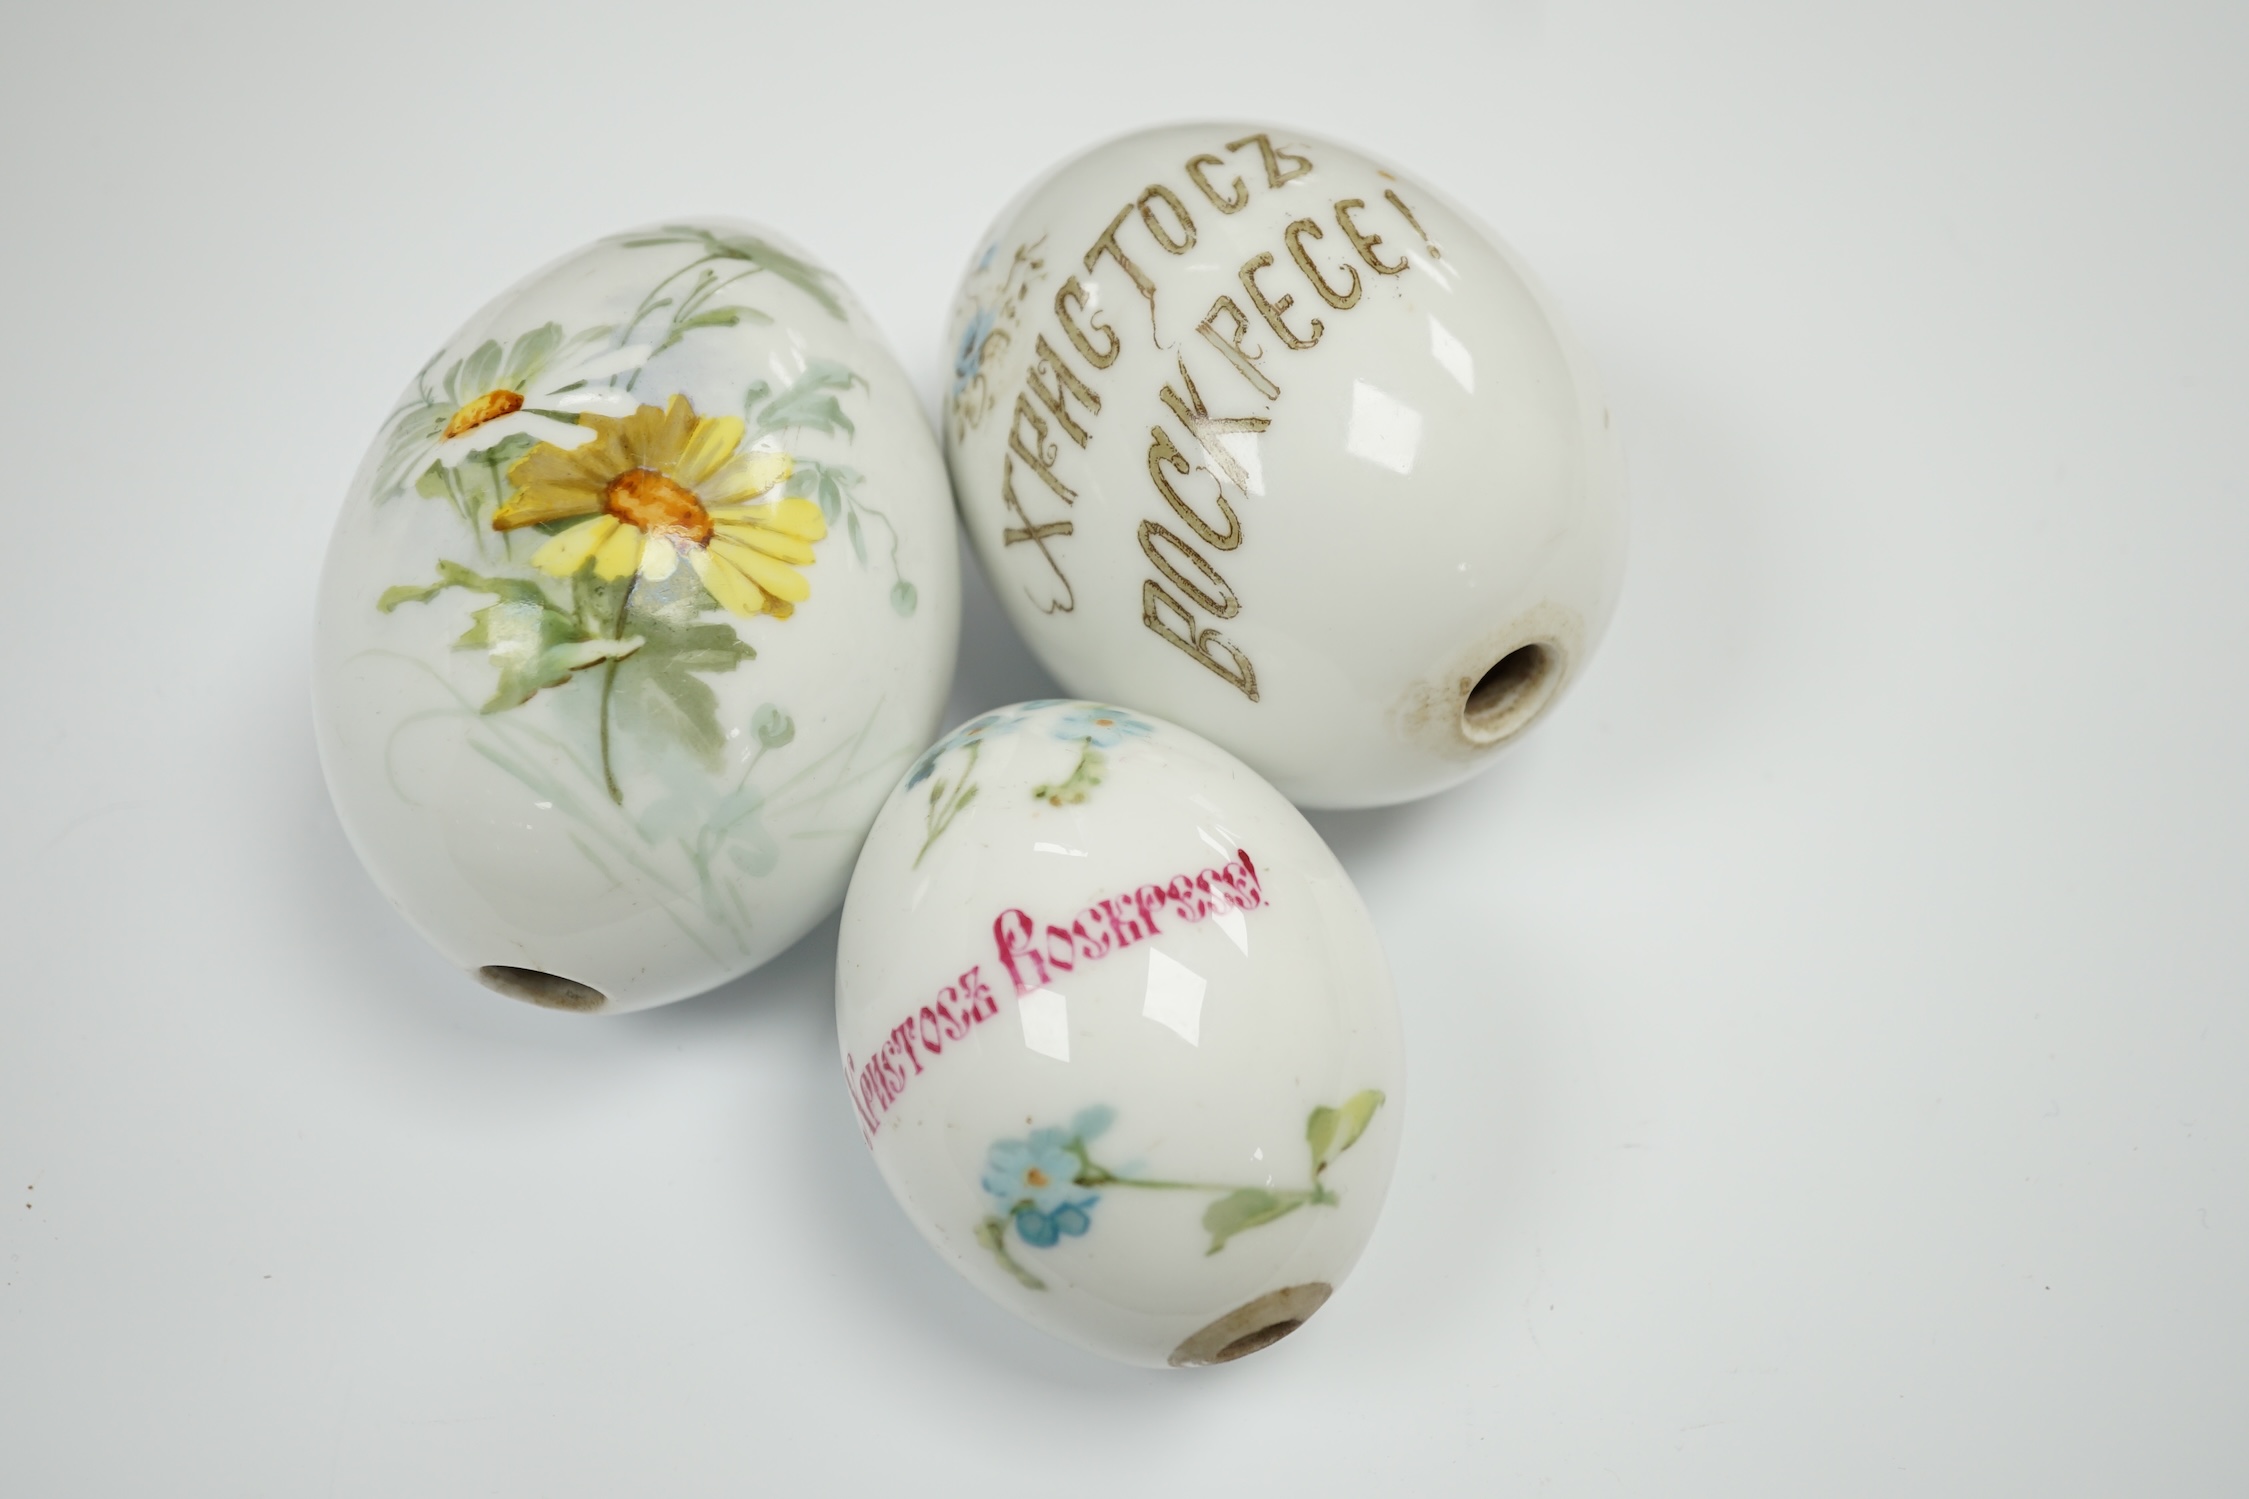 Three Russian porcelain Easter eggs, 19th century, 11cm in length - Image 2 of 3